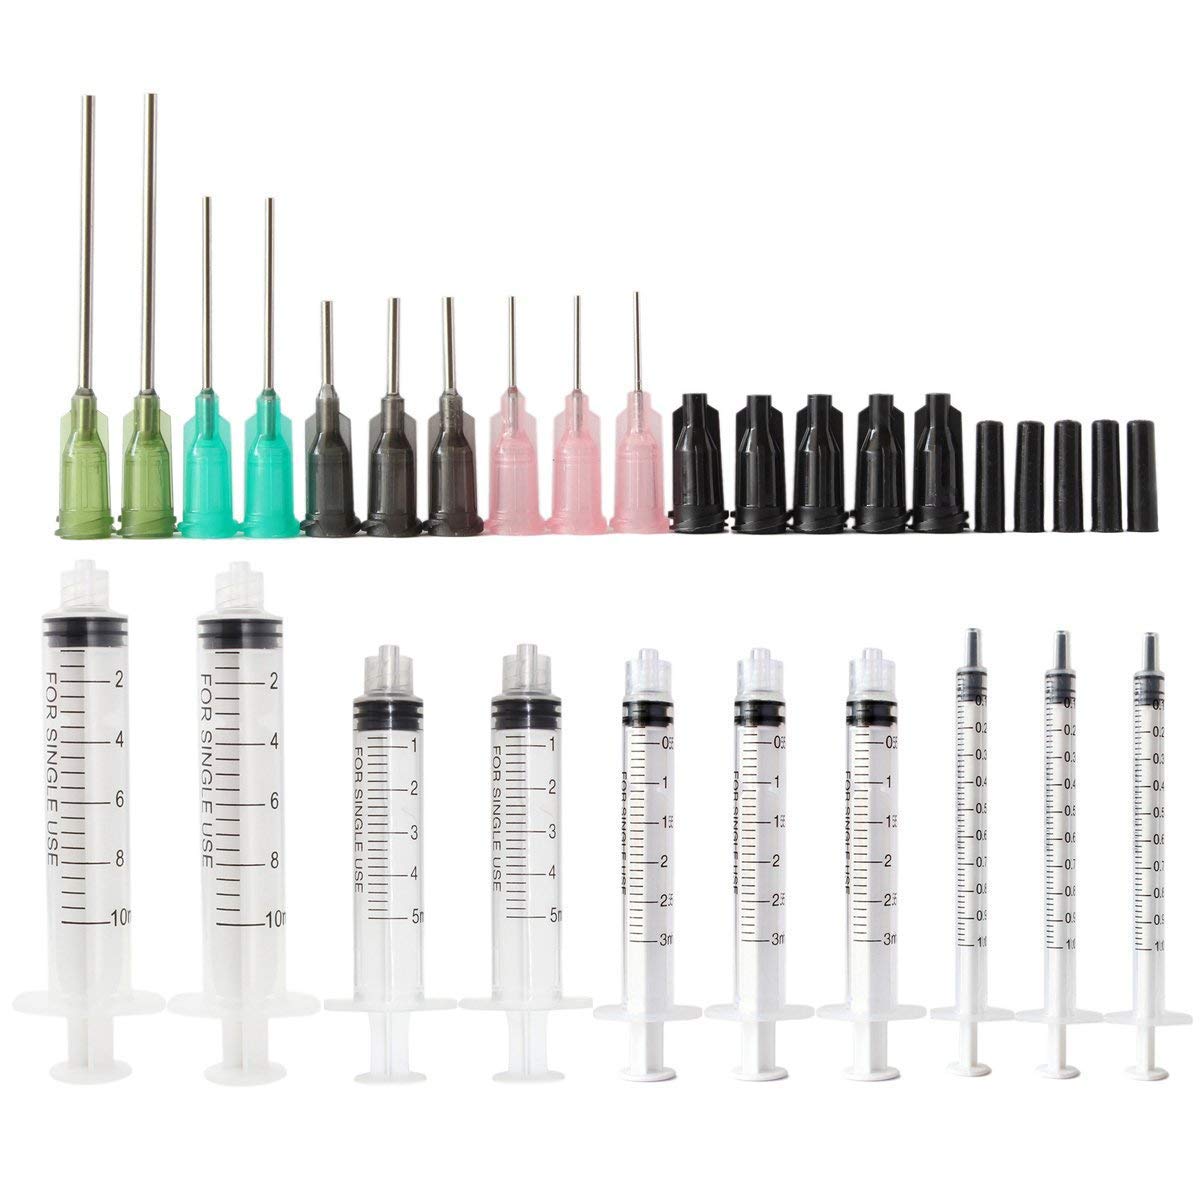 Glue Syringe for woodworking, 3ml Blunt Tip Injection Syringes Luer Lock  16Ga 18Ga 20Ga Blunt Needle with Caps, for Epoxy Resin Oil Ink Injector